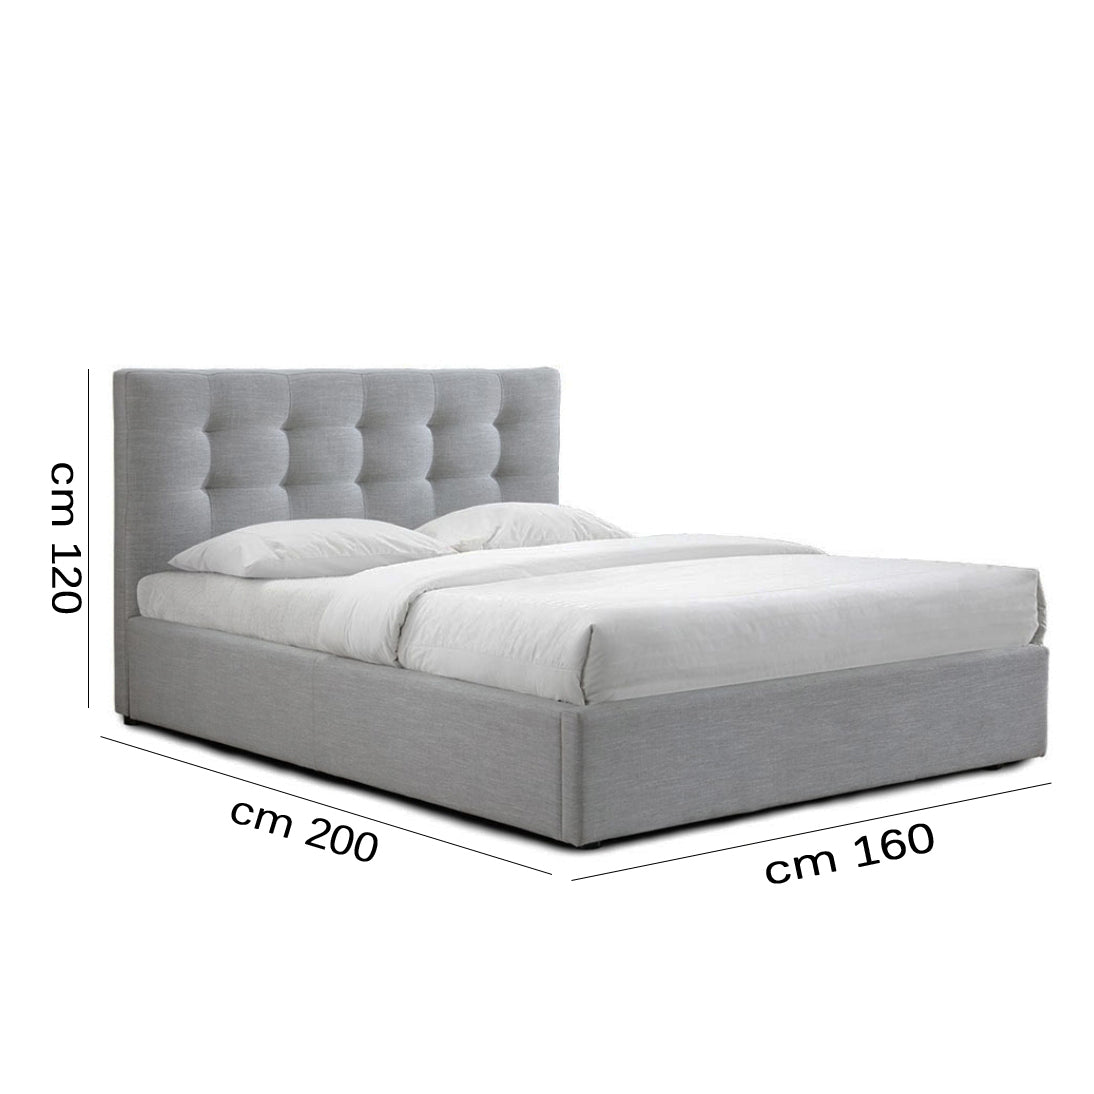 Bed - mechanical storage- multiple colors - multiple sizes - WS017